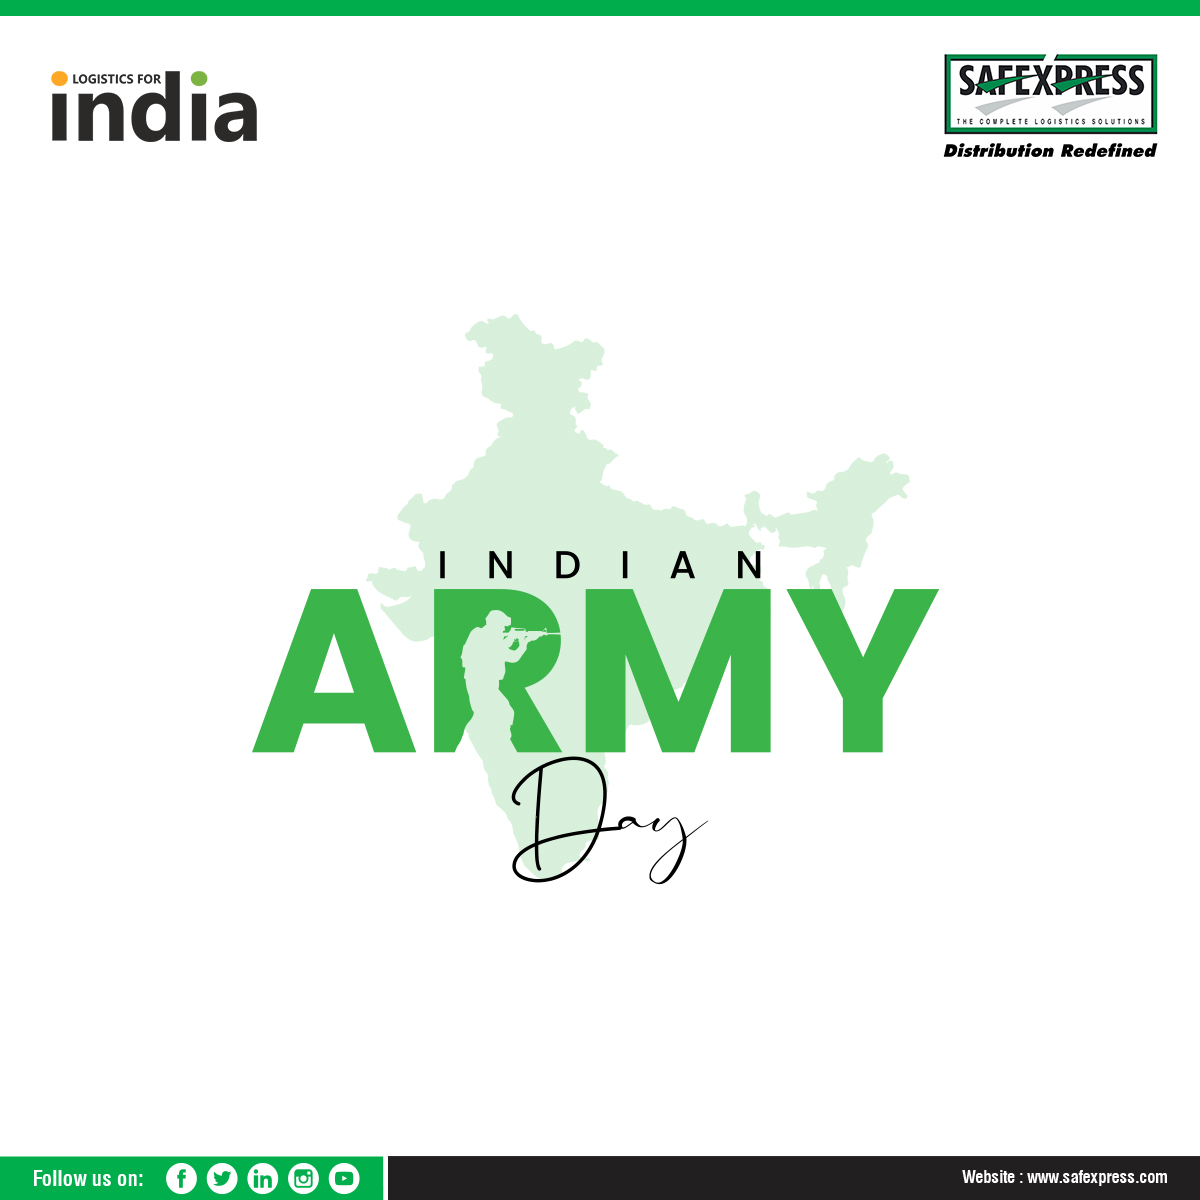 On this Indian Army Day, #Safexpress salutes the brave hearts who are the reason behind our pride, smile and safety!

#NationalArmyDay #IndianArmy #PrideOfOurNation #India #JaiHind